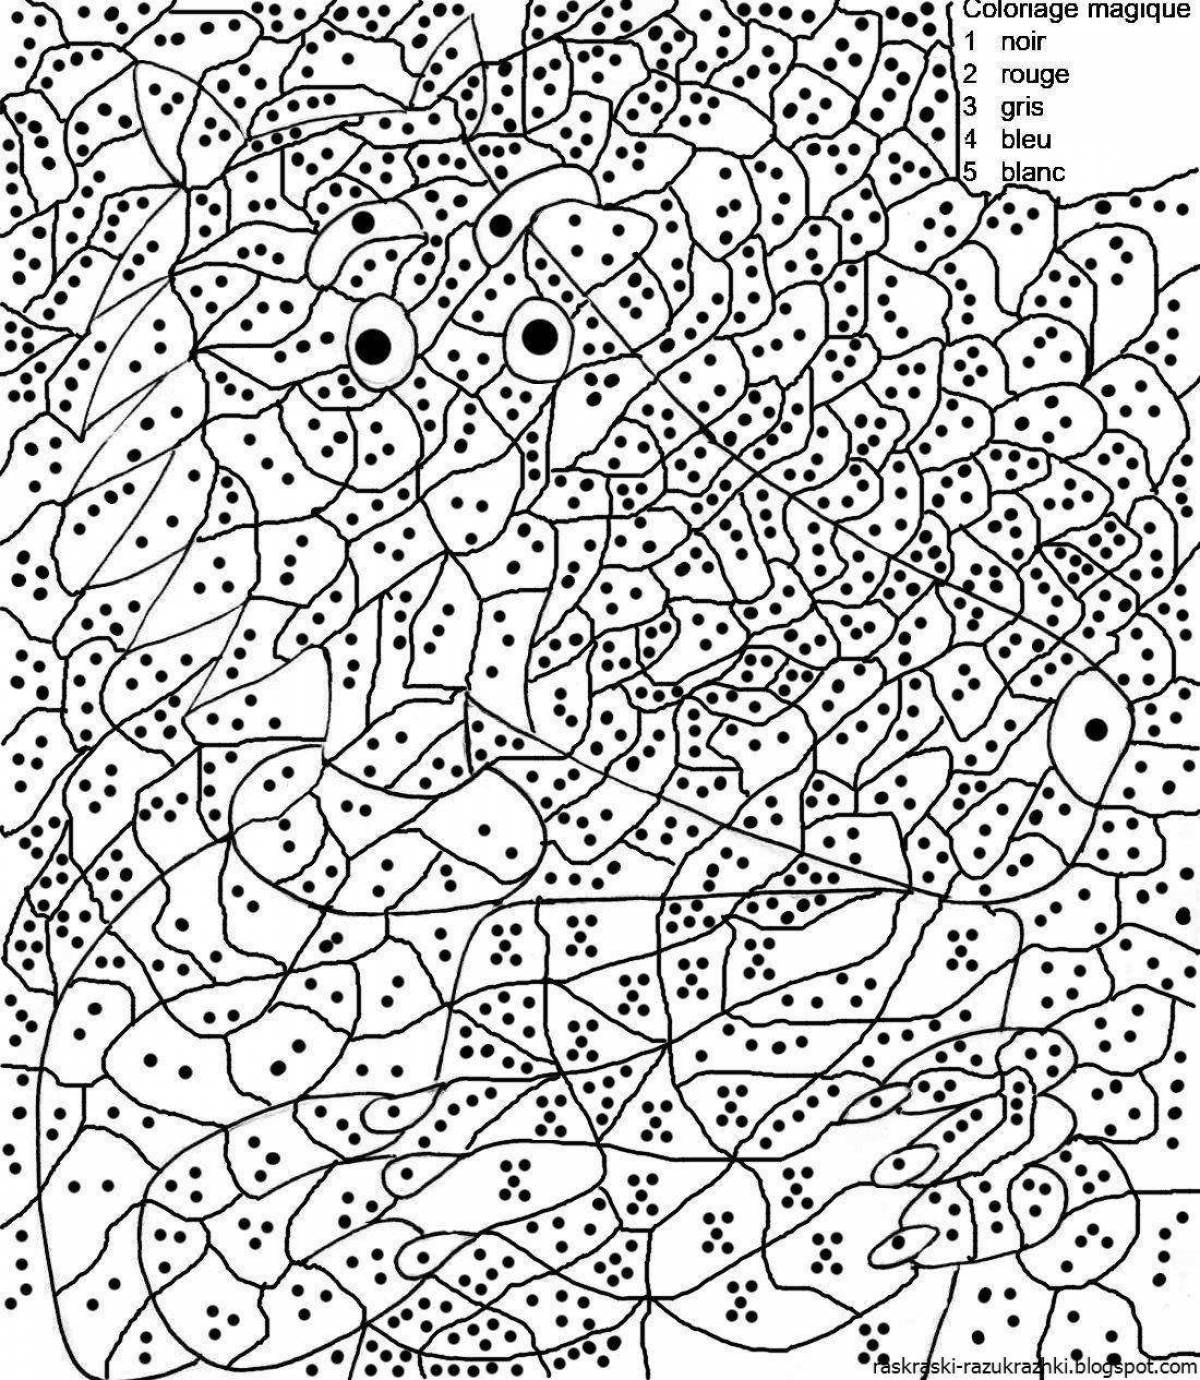 Participation in coloring by numbers